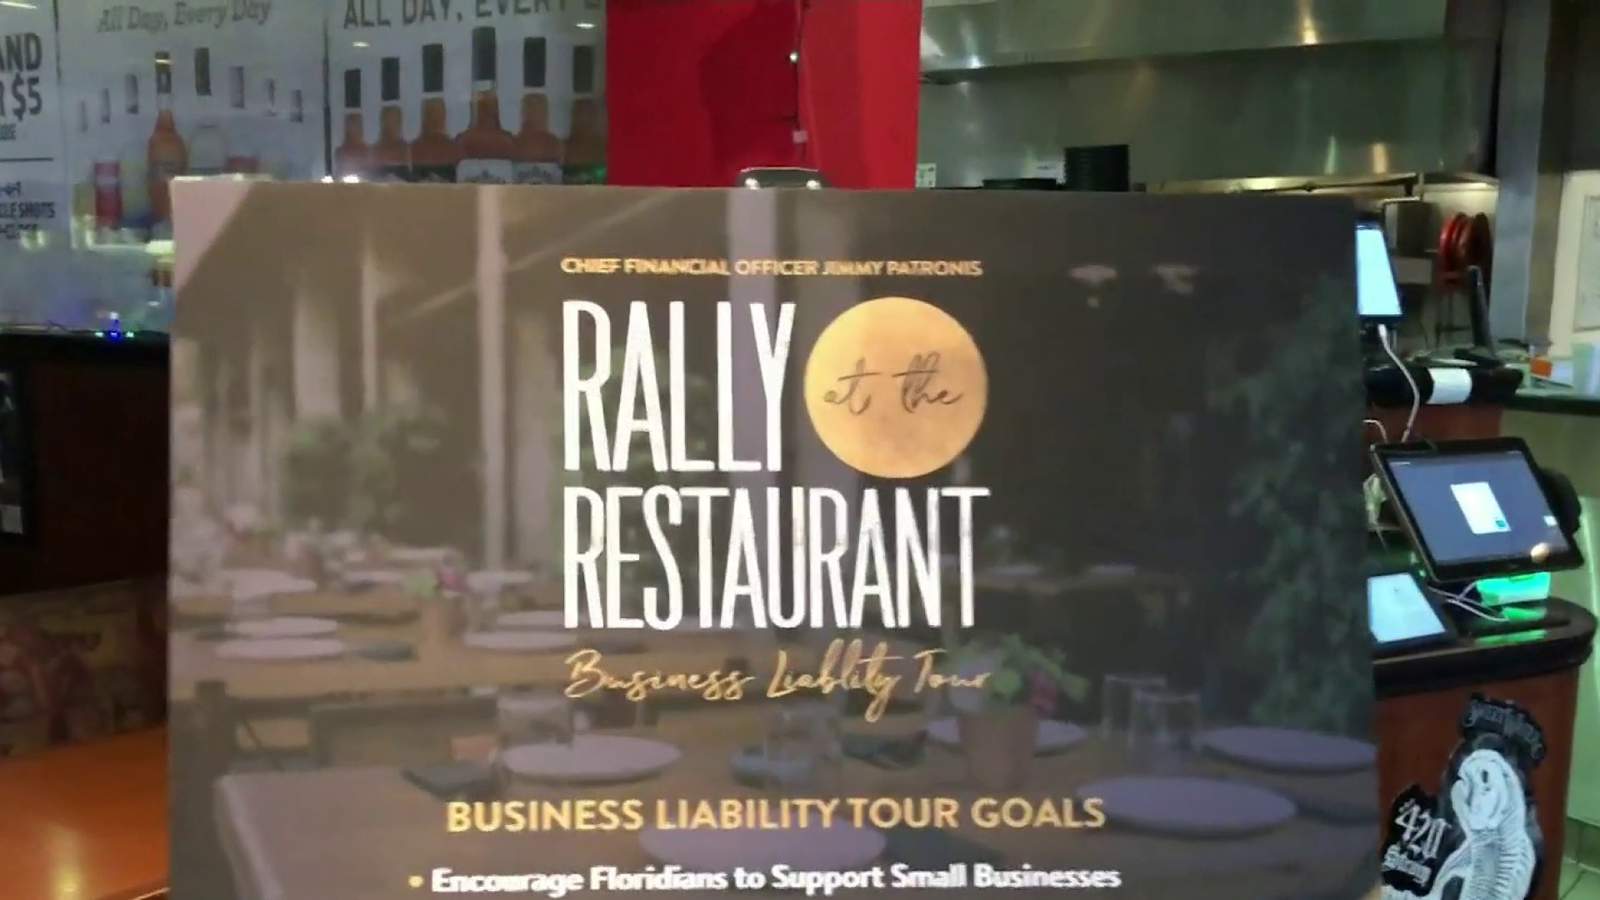 Florida CFO advocates for business protections on restaurant tour